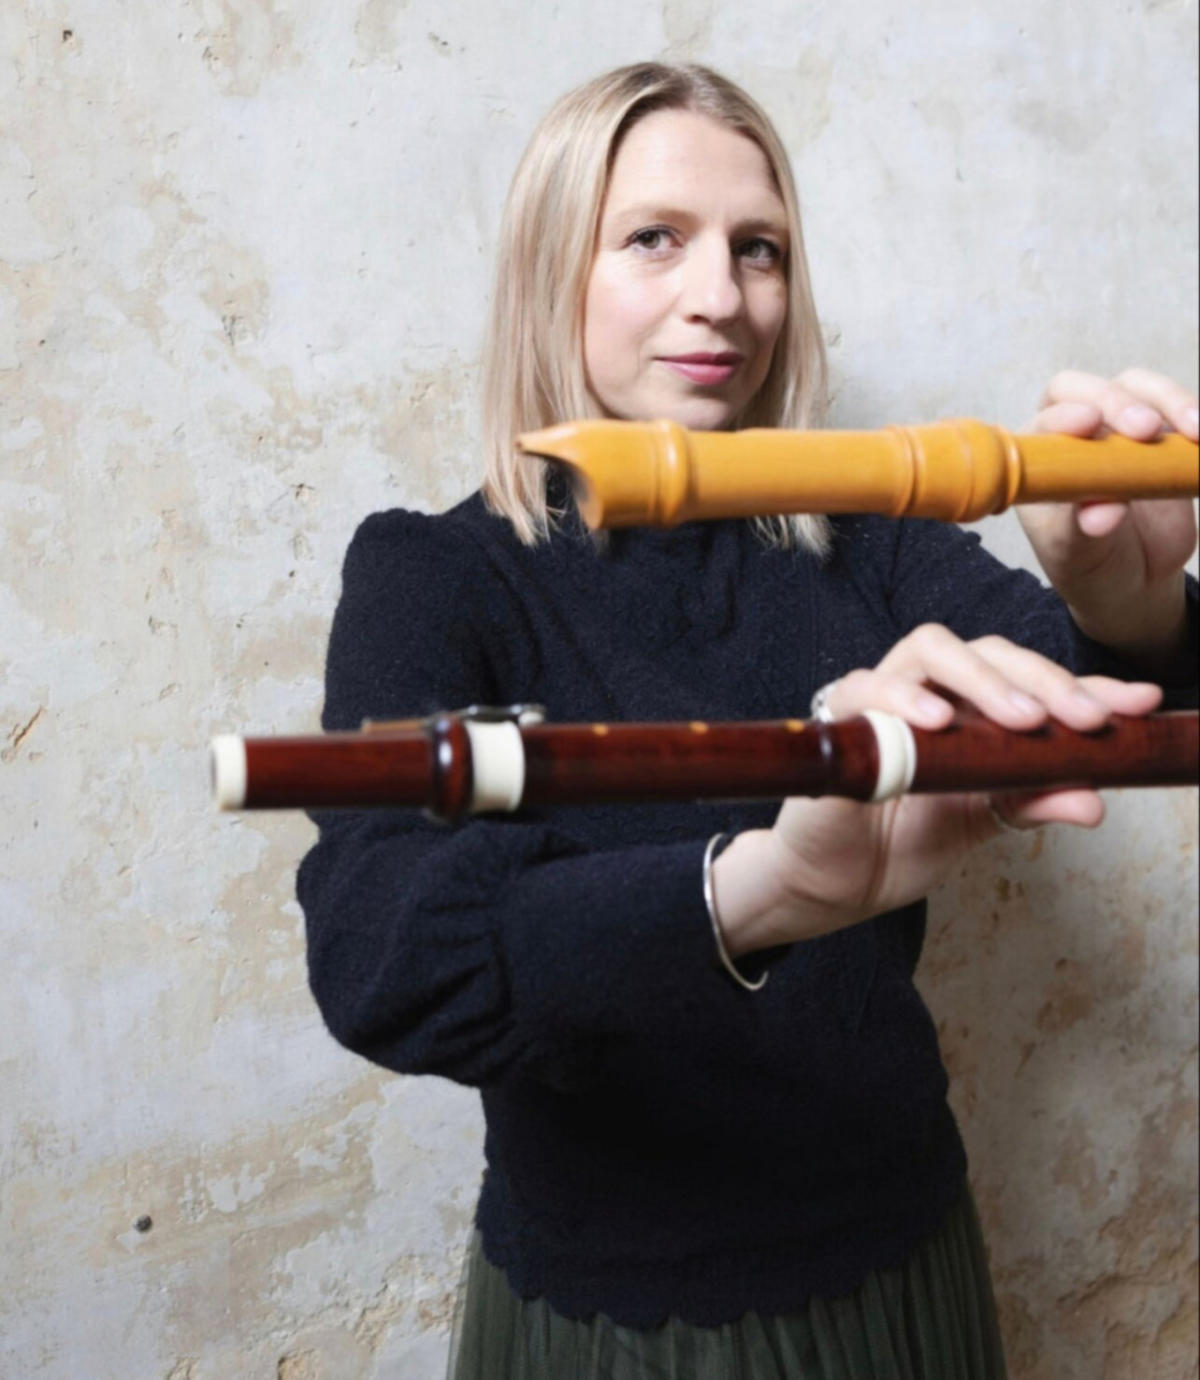 Graft, galleries, and genre-busting: the endless possibilities of the recorder - Recorder player Heidi Fardell writes about her life and career in music